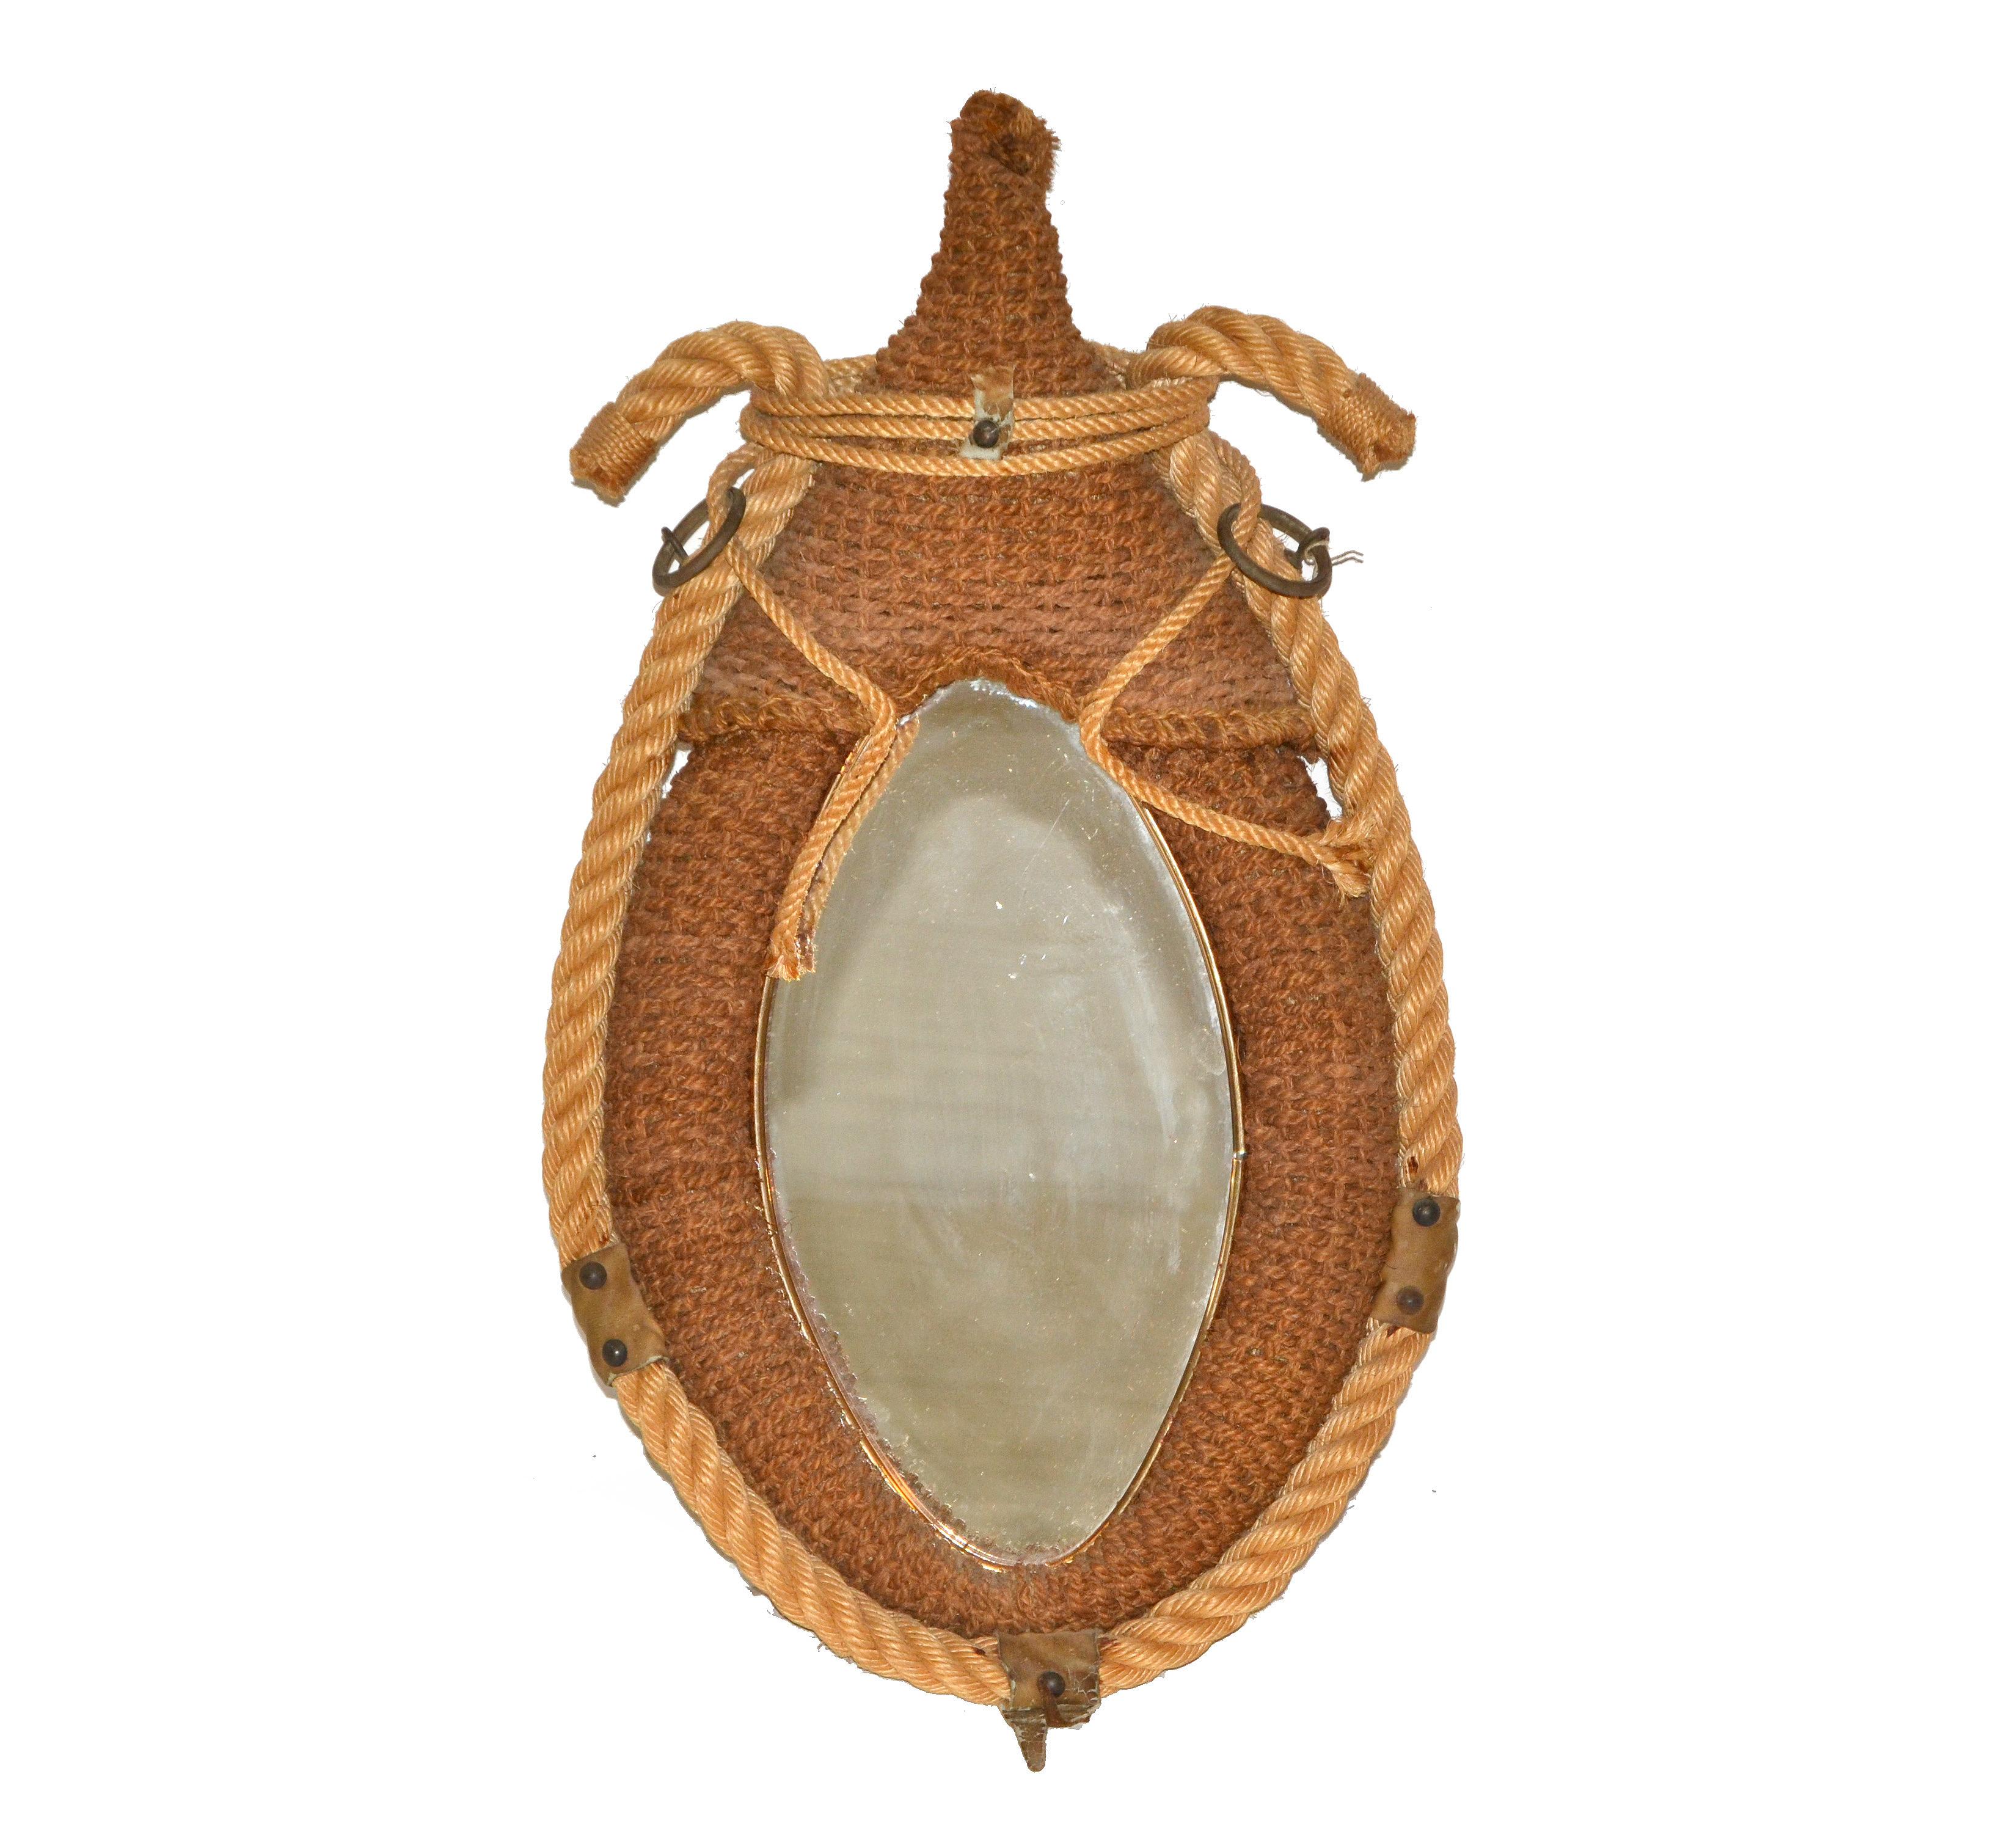 1970s Beige Audoux Minet style oval nautical French Provincial Robe & Jute wall mirror.
Superb handmade craftsmanship.